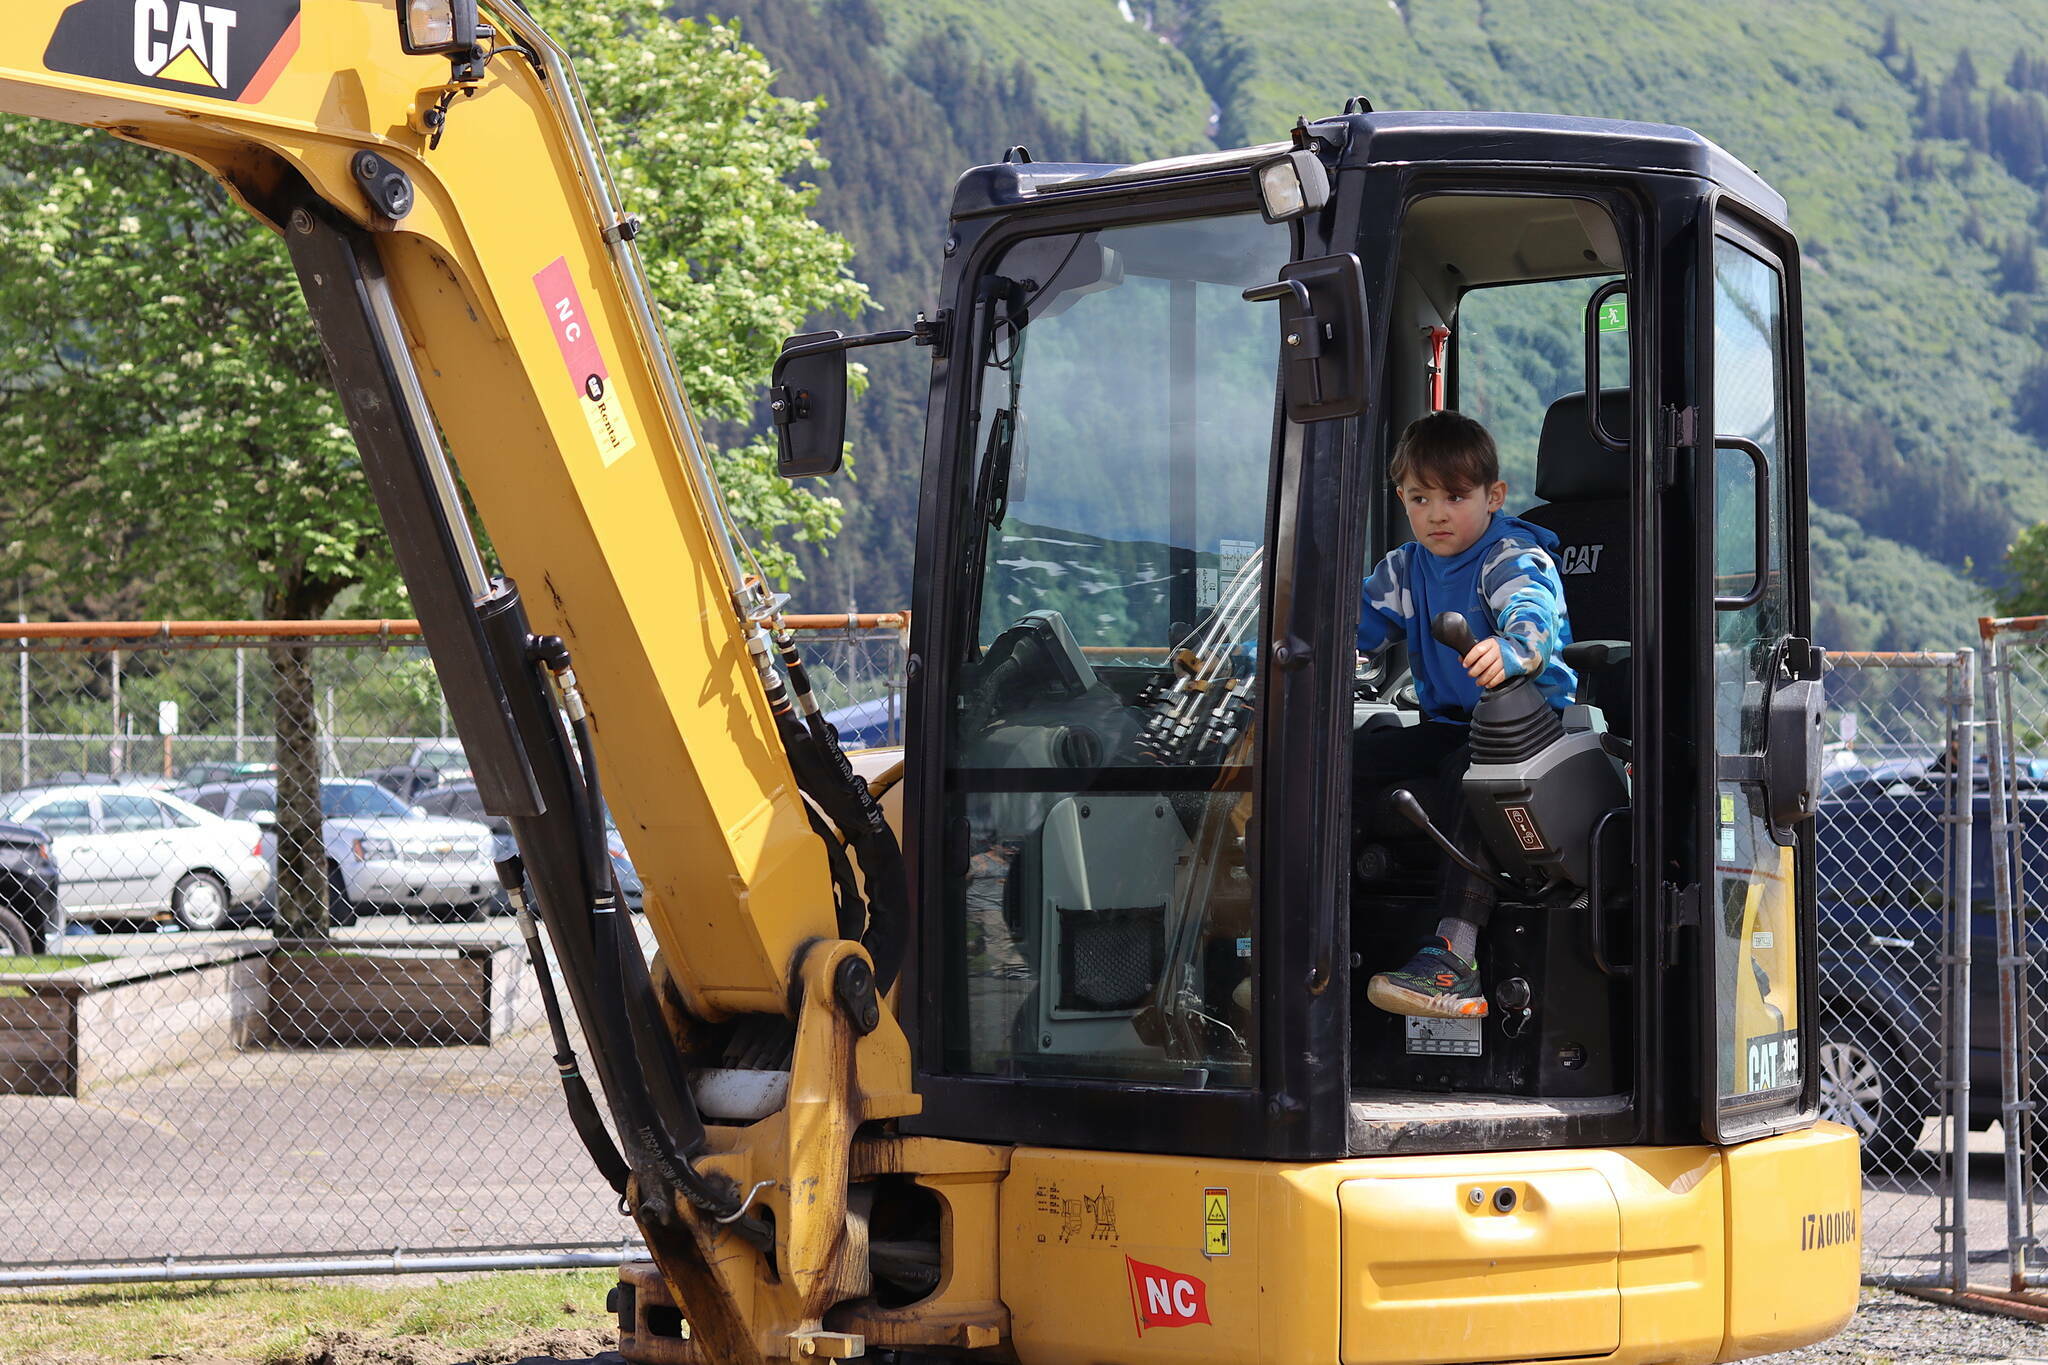 James Whistler, 8, operates a mini excavator during Gold Rush Days on Saturday, June 17, 2023. People young and old were offered a chance to place tires around traffic cones and other challenges after getting a brief introduction to the excavator. (Mark Sabbatini / Juneau Empire file photo)